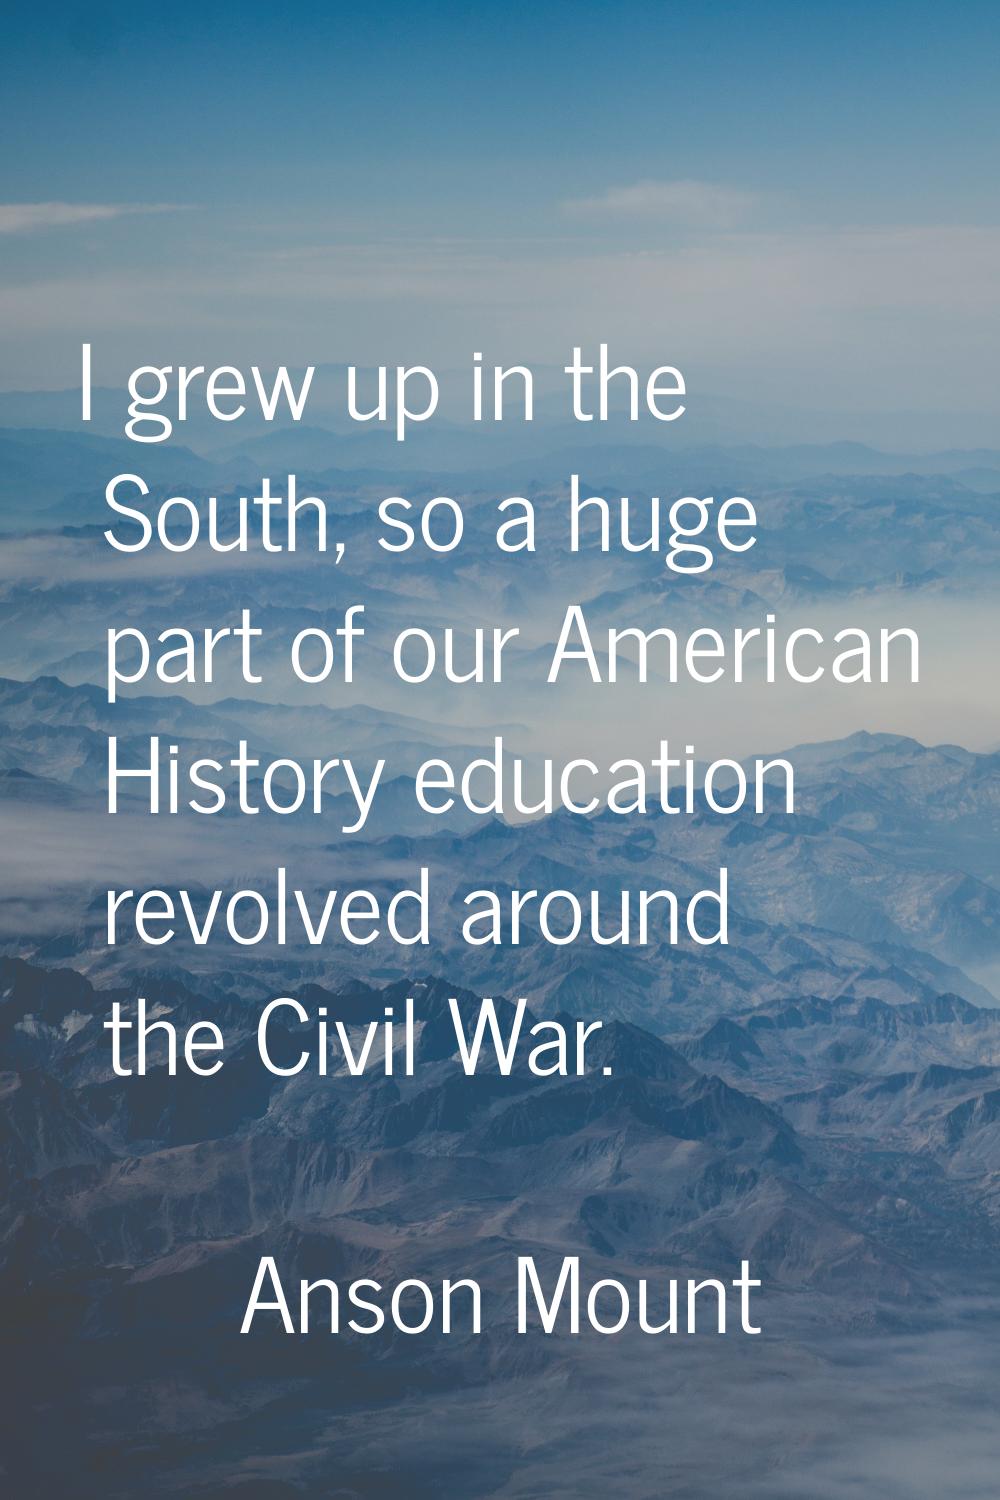 I grew up in the South, so a huge part of our American History education revolved around the Civil 